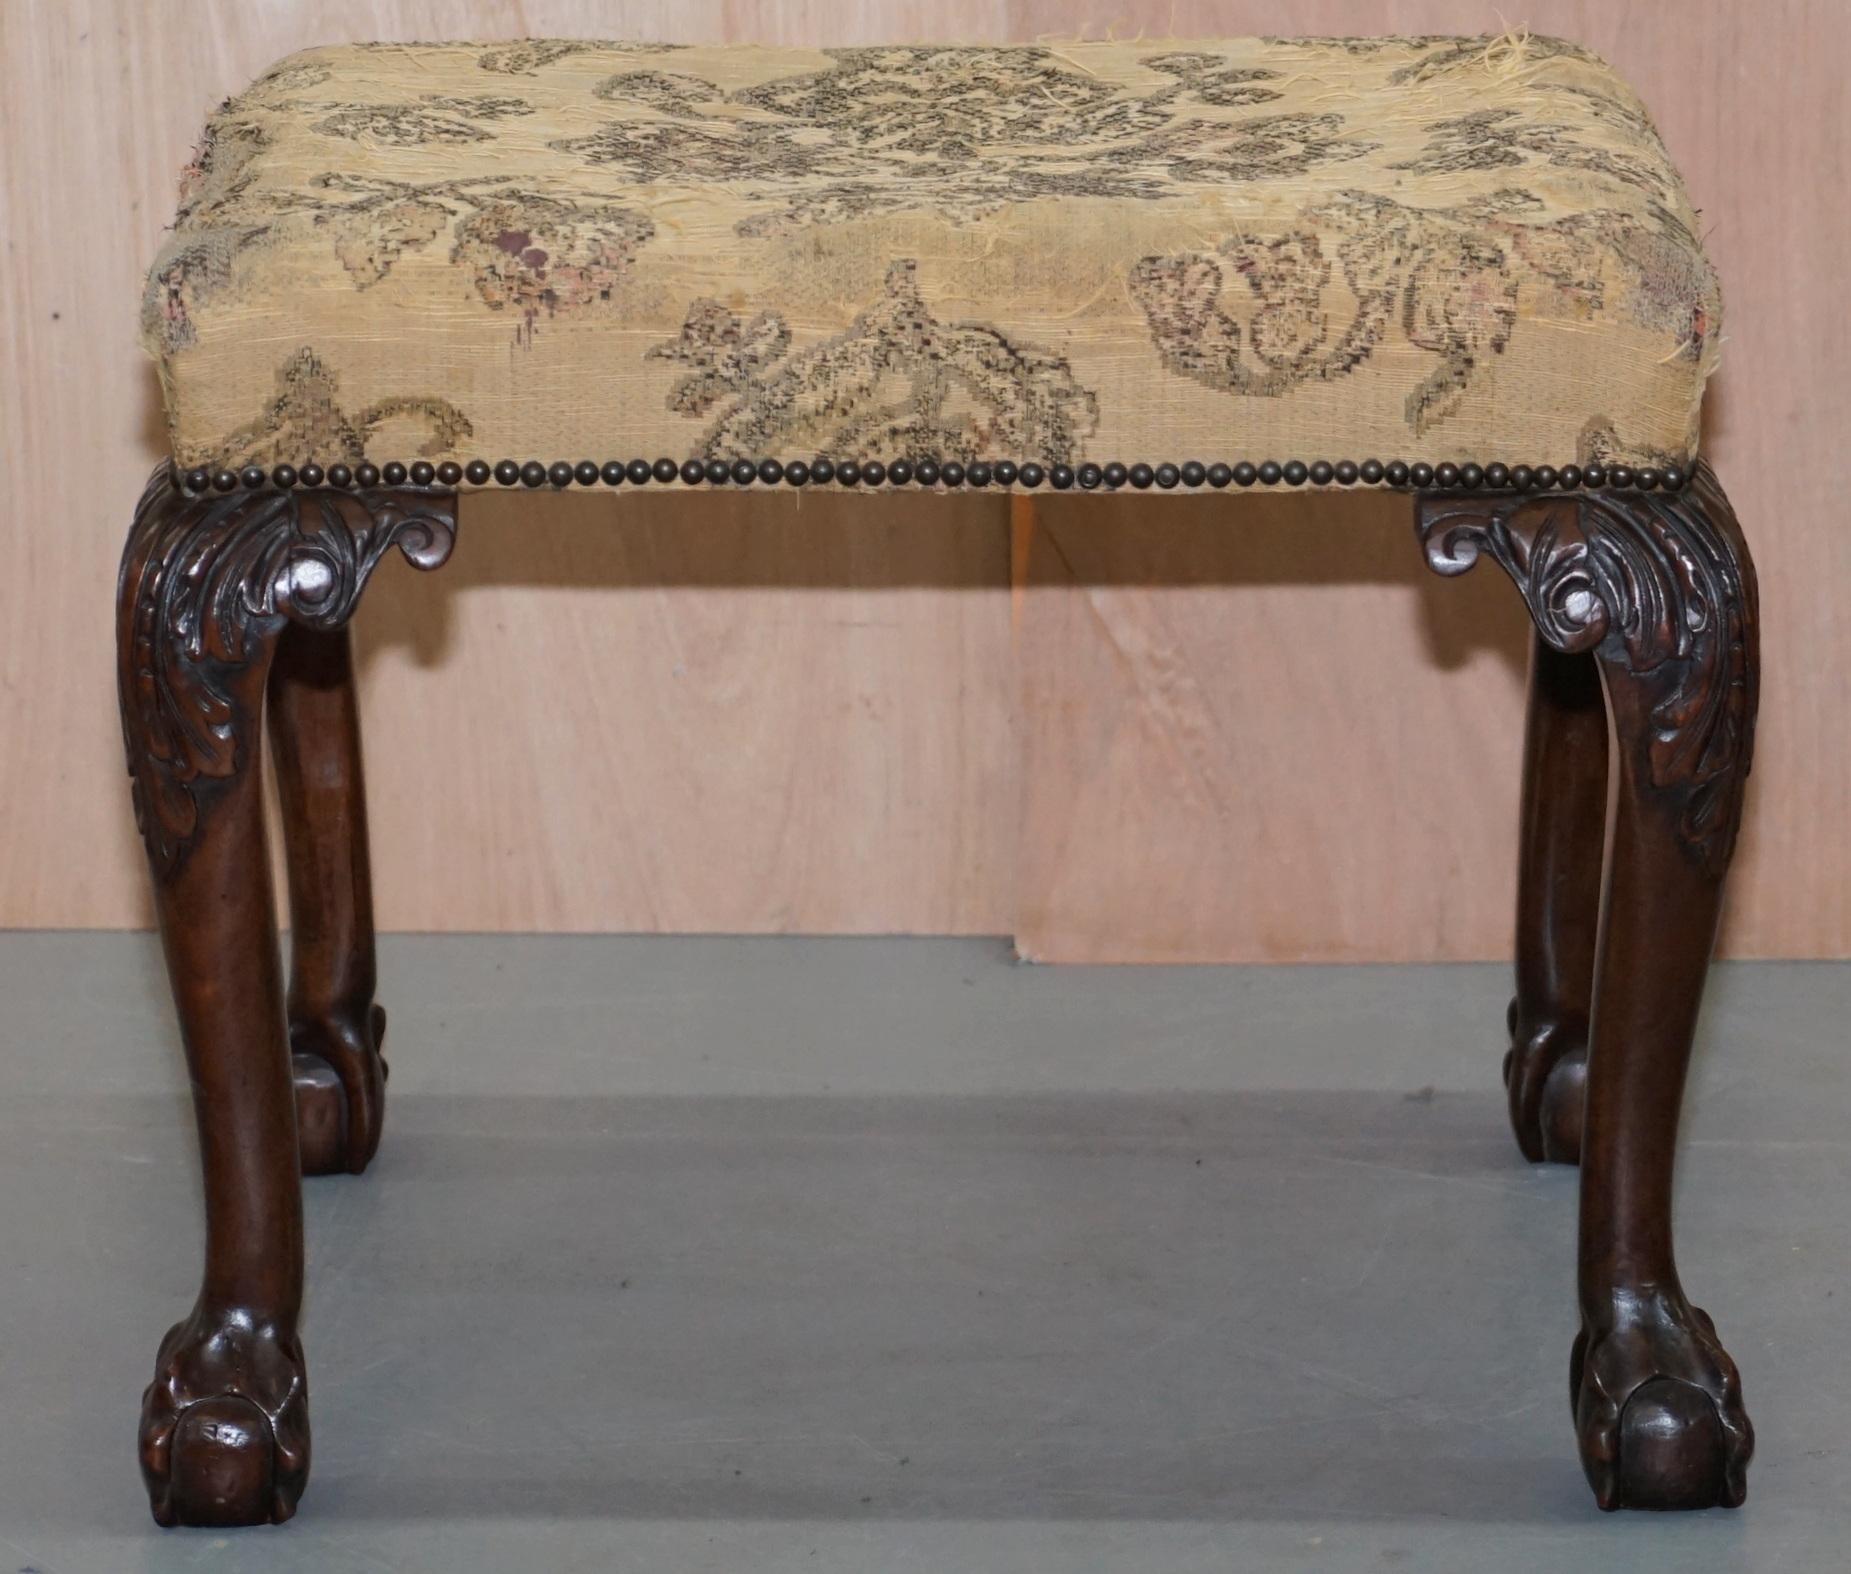 We are delighted to offer for salethis lovely hand carved Georgian Irish / George II mahogany stool with original floral embroidered upholstery and claw & ball feet

A very good looking well made and decorative piece, this is like art furniture to